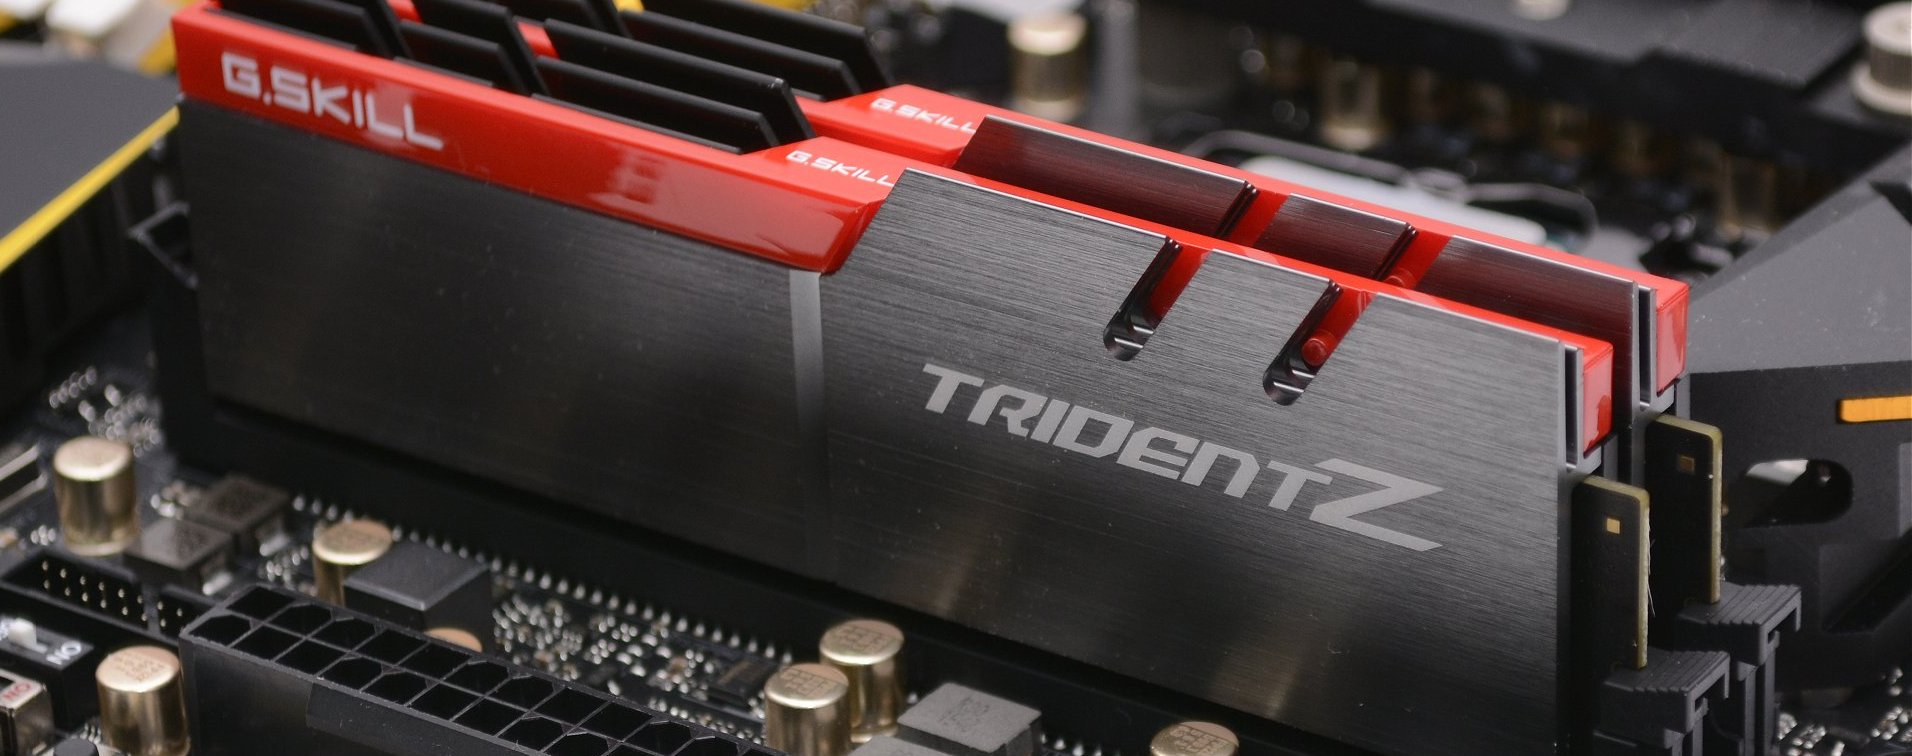 PC component prices, including DDR4 kits, continue to fall